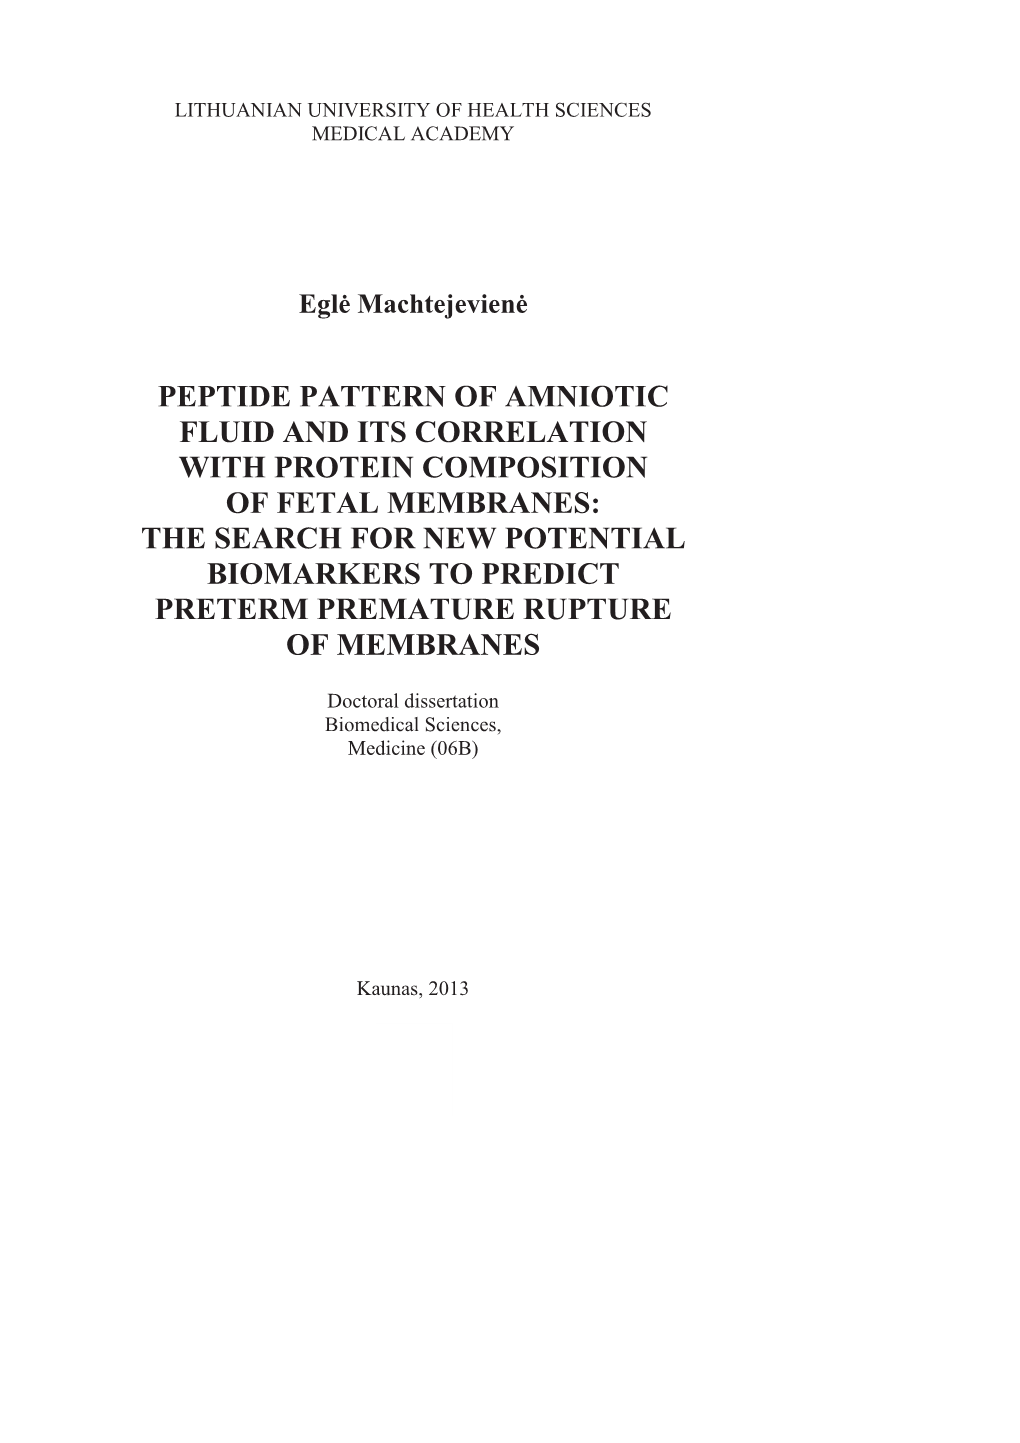 Peptide Pattern of Amniotic Fluid and Its